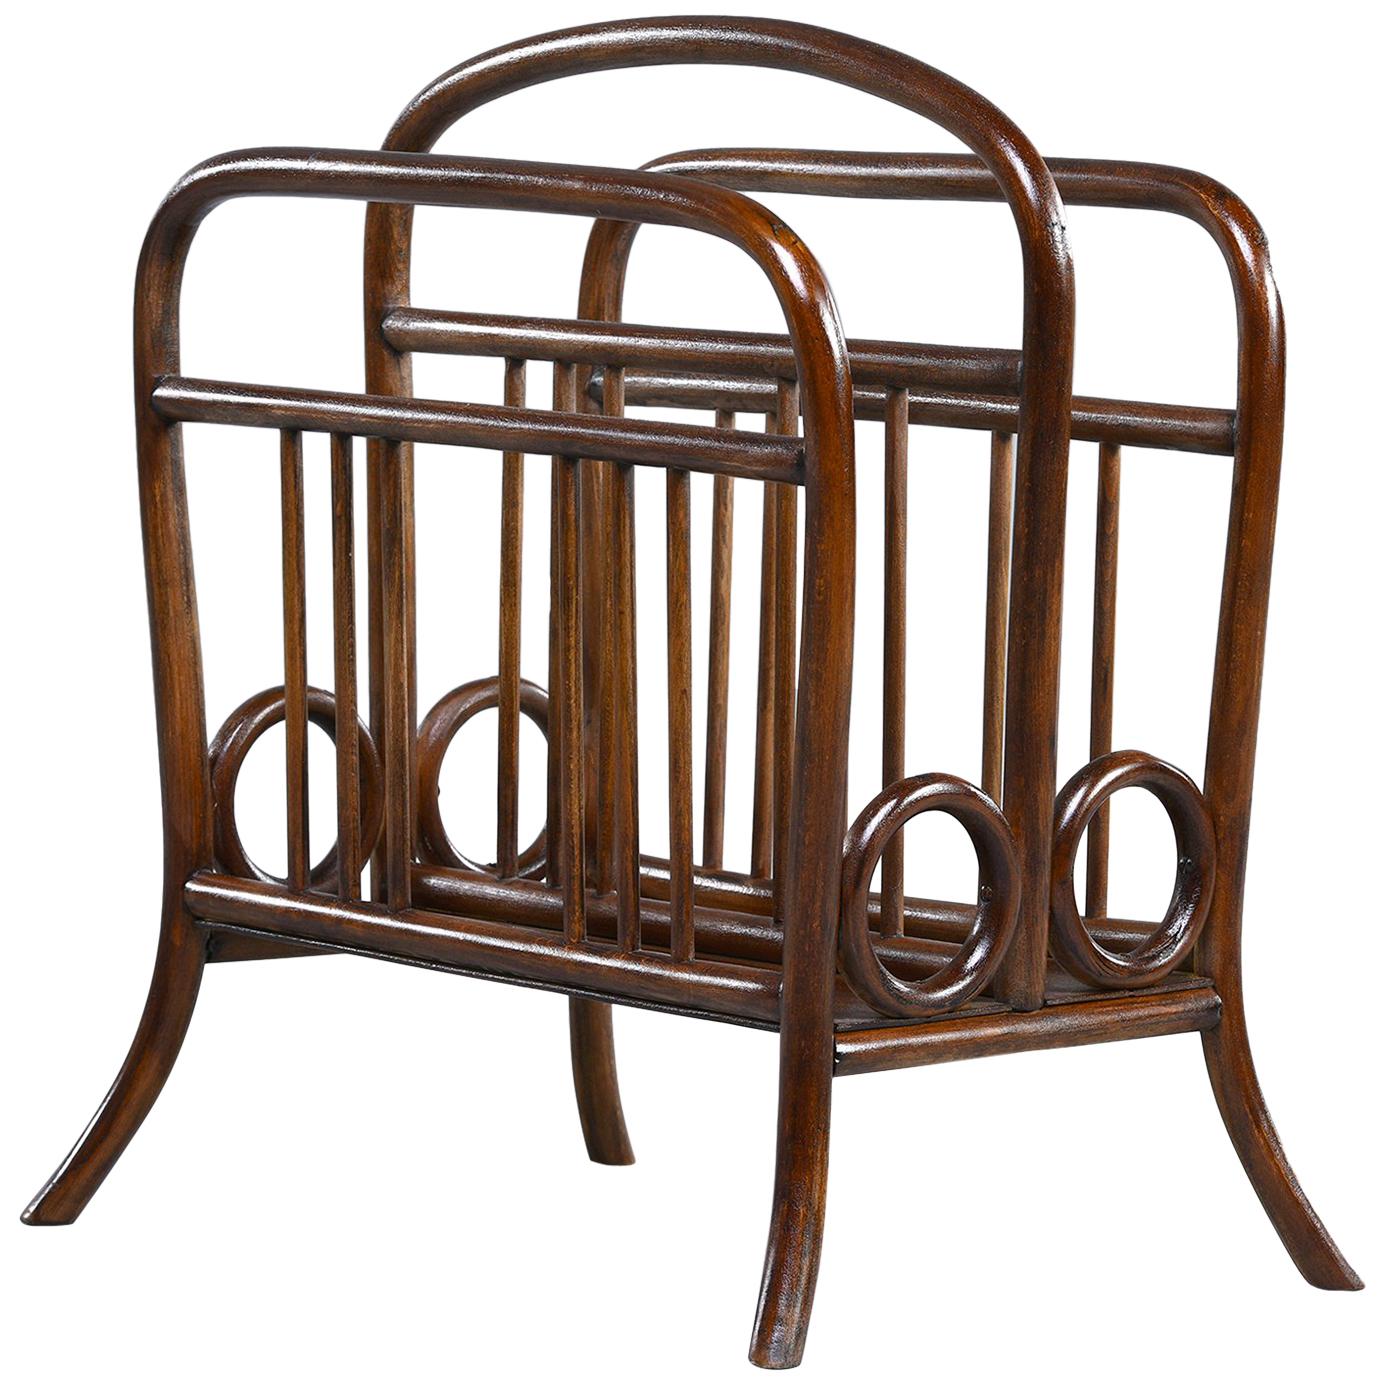 Early Thonet Bentwood Magazine Rack in Manner of Josef Hoffmann